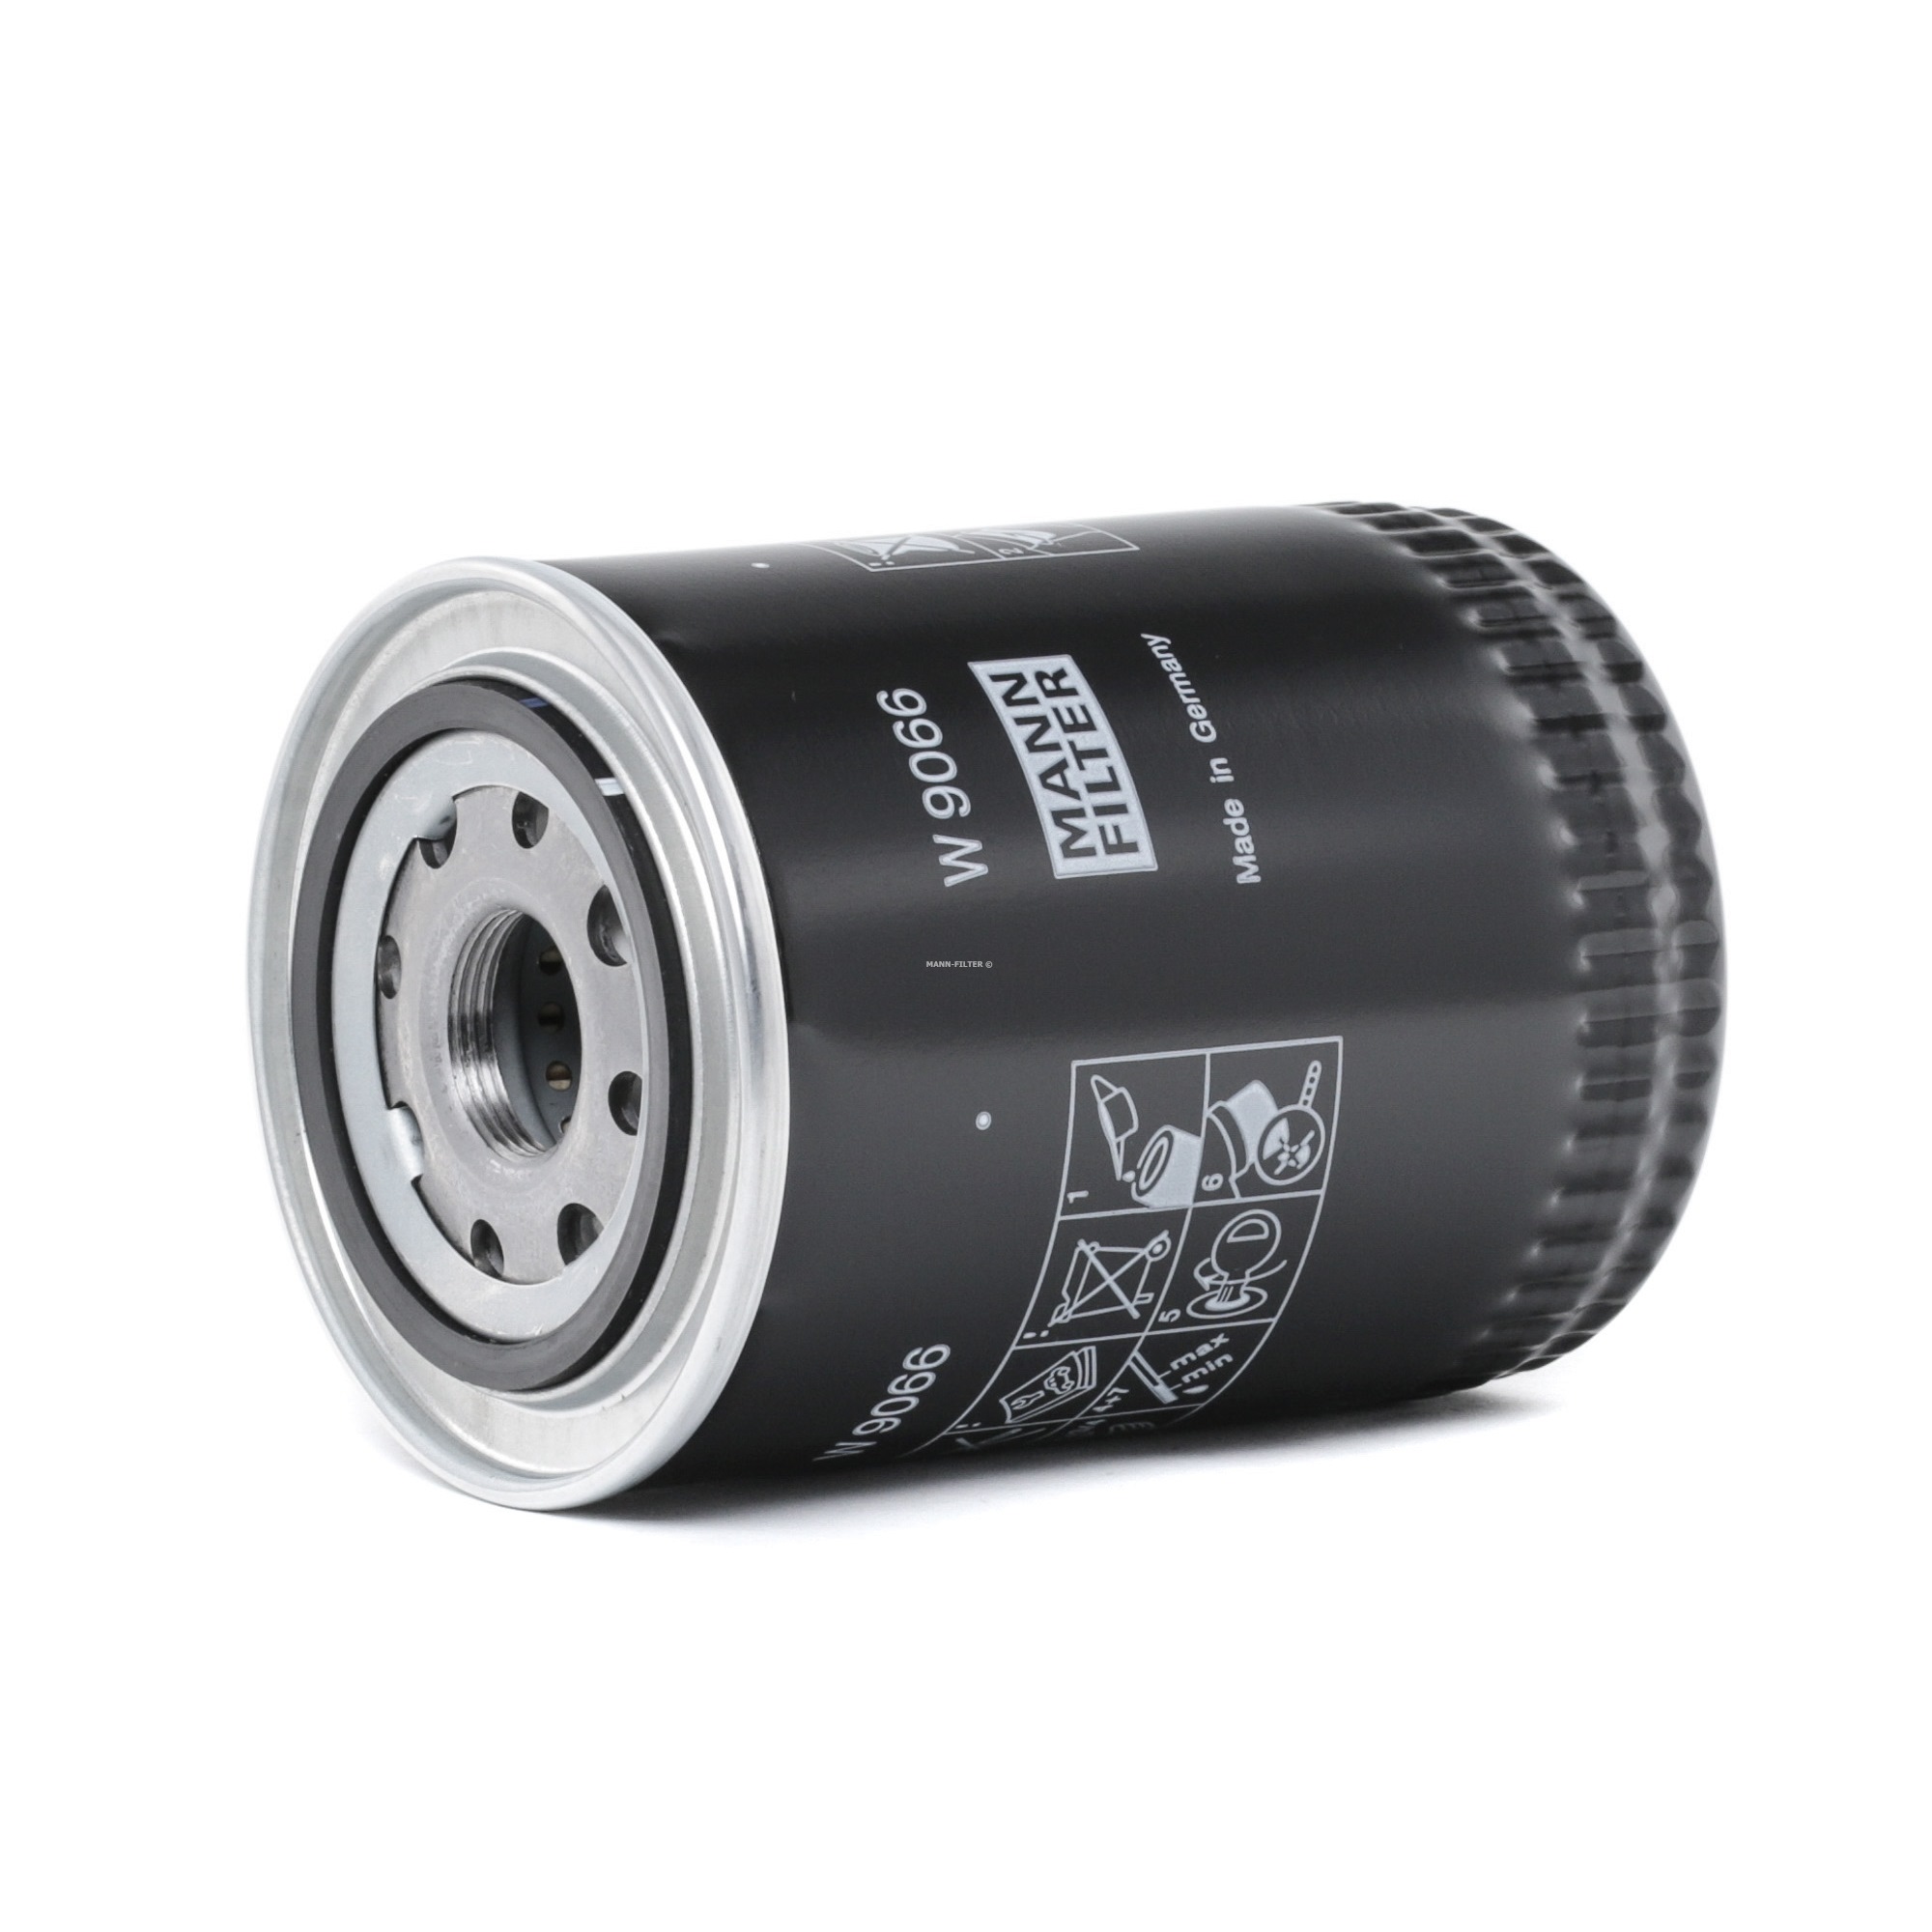 W 9066 MANN-FILTER Oil filters MITSUBISHI M 26 X 1.5, with one anti-return valve, Spin-on Filter